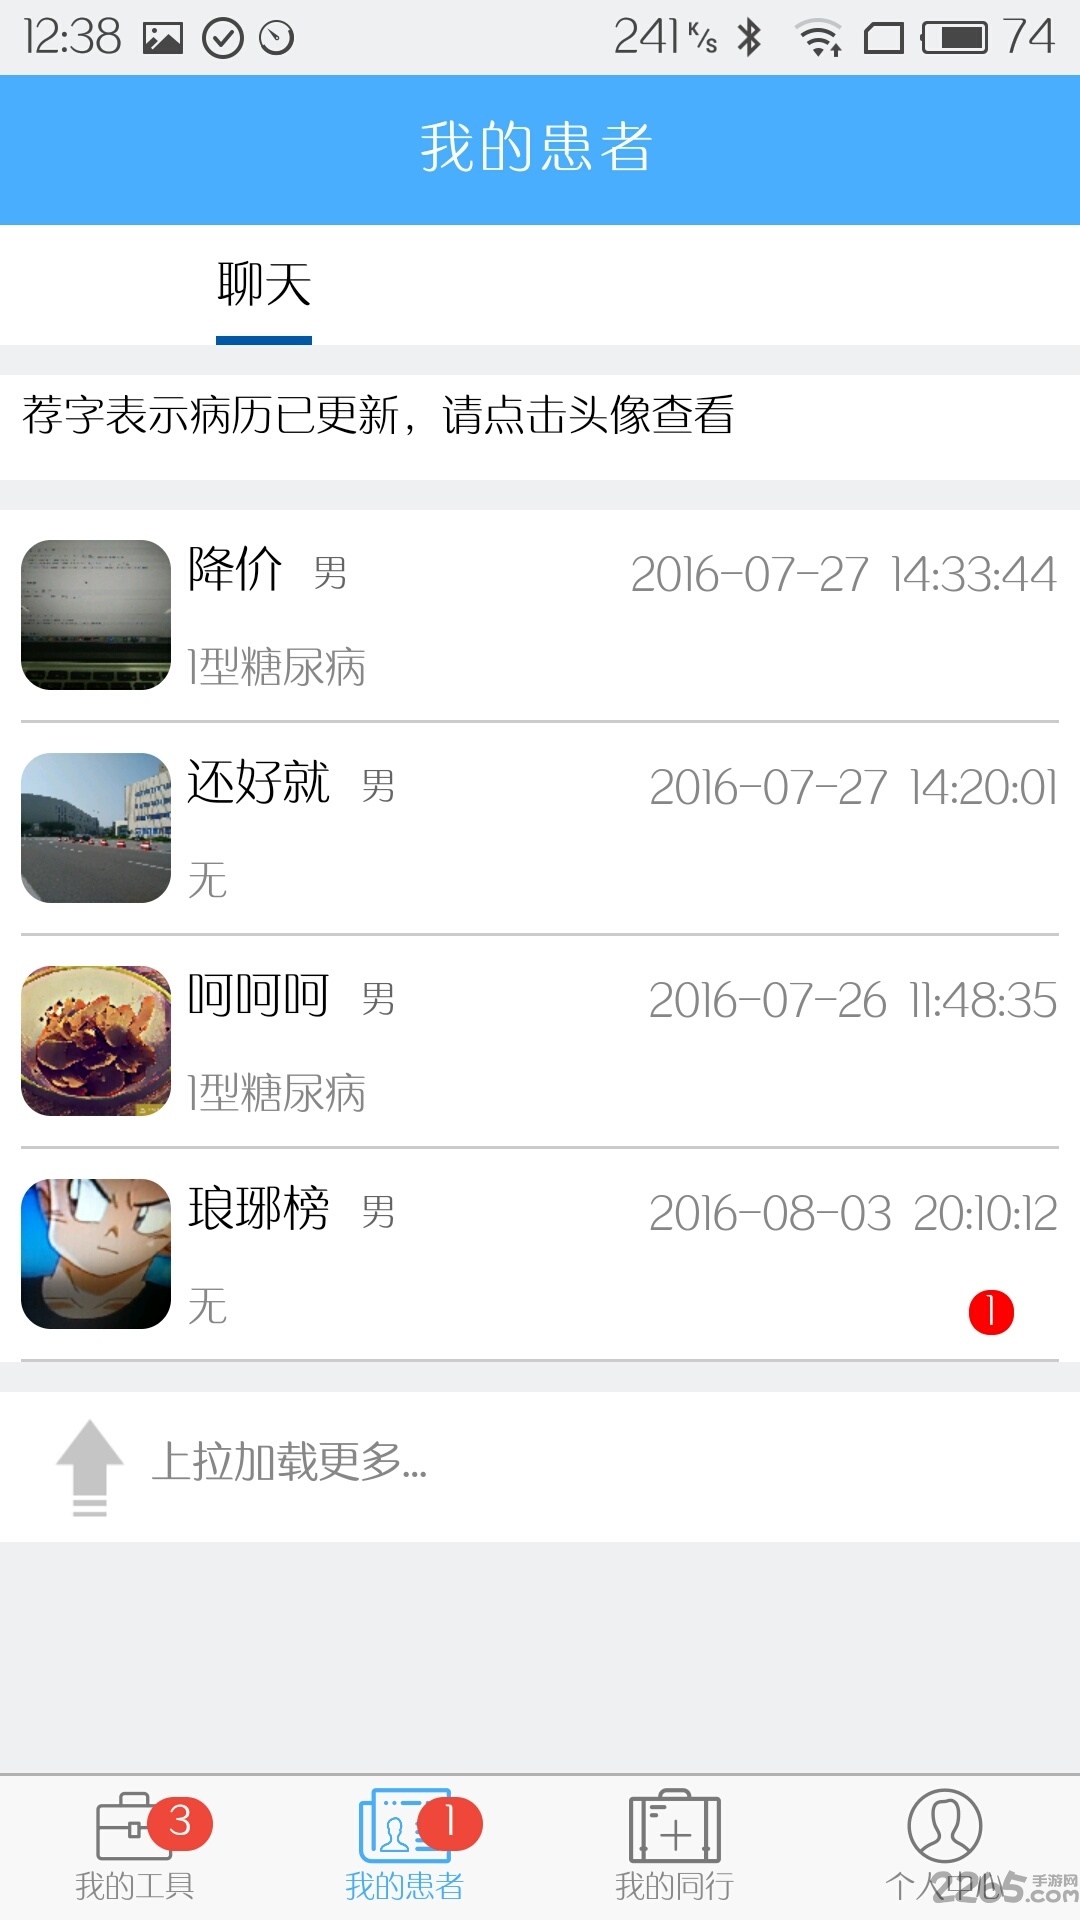 ѿҽ v3.4 ٷ׿ 3